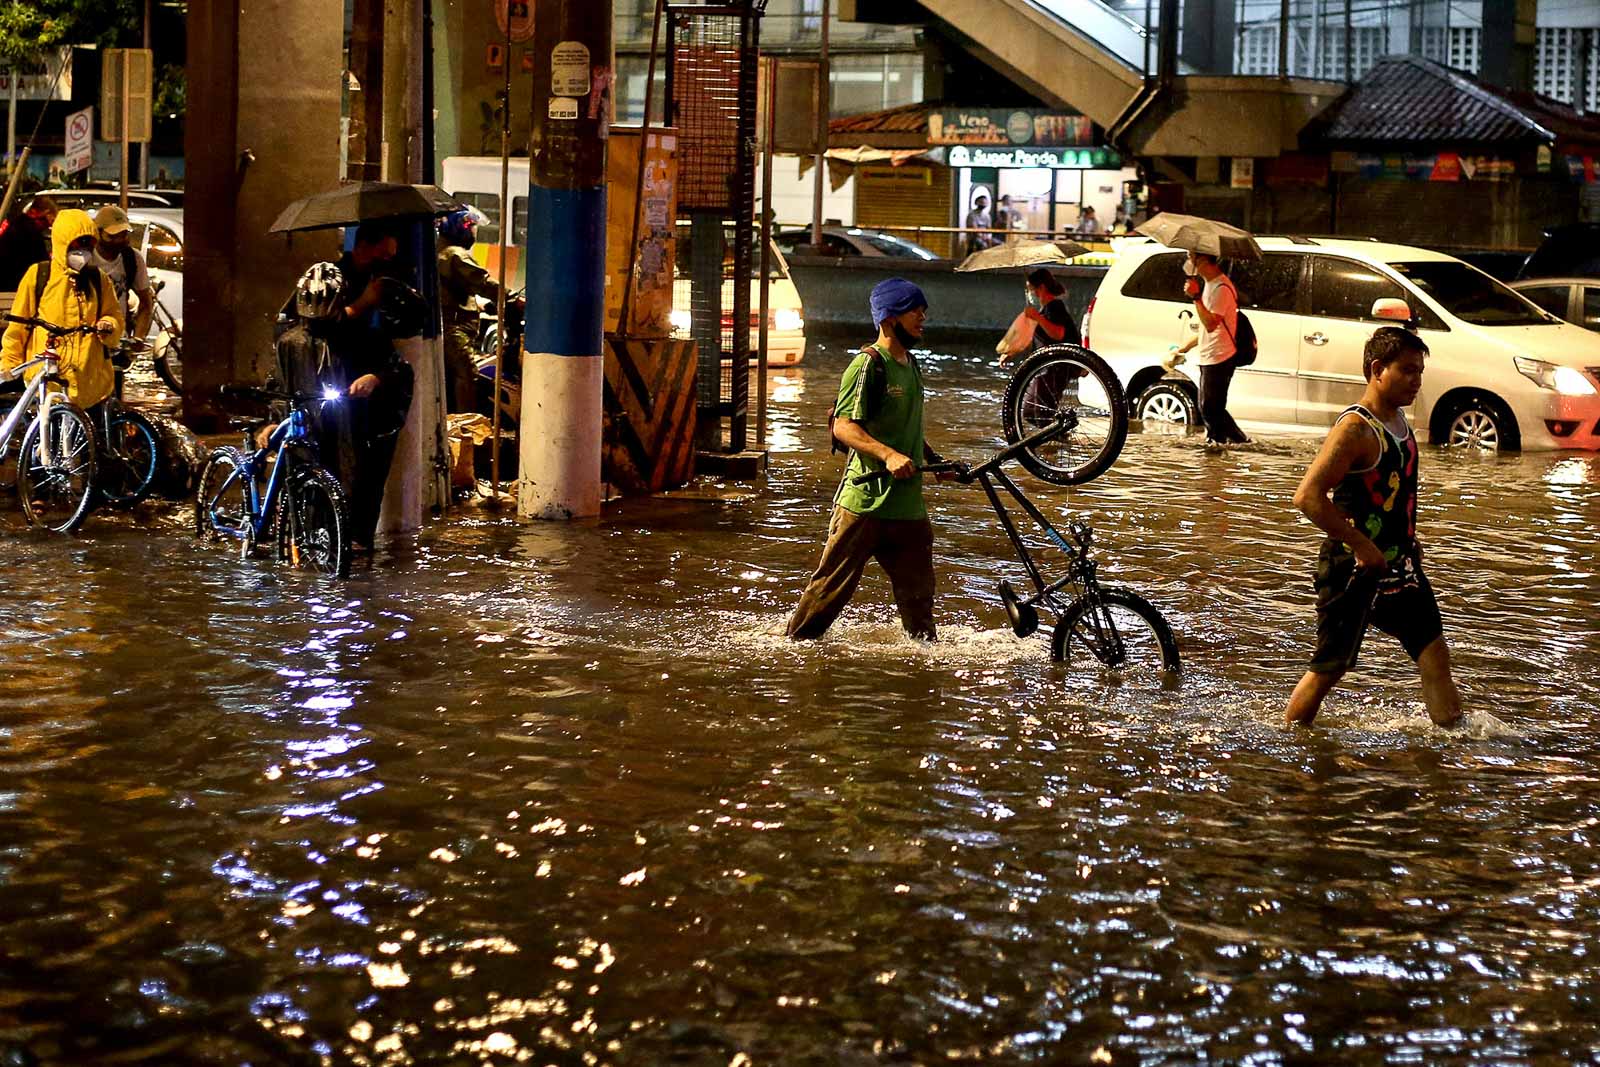 FLOODED. Bicycle riders and pedestrians wade through floods along Taft Avenue in Manila on June 11, 2020, after heavy rain from Tropical Depression Butchoy. Motorists are also stuck in traffic. Photo by Inoue Jaena/Rappler 